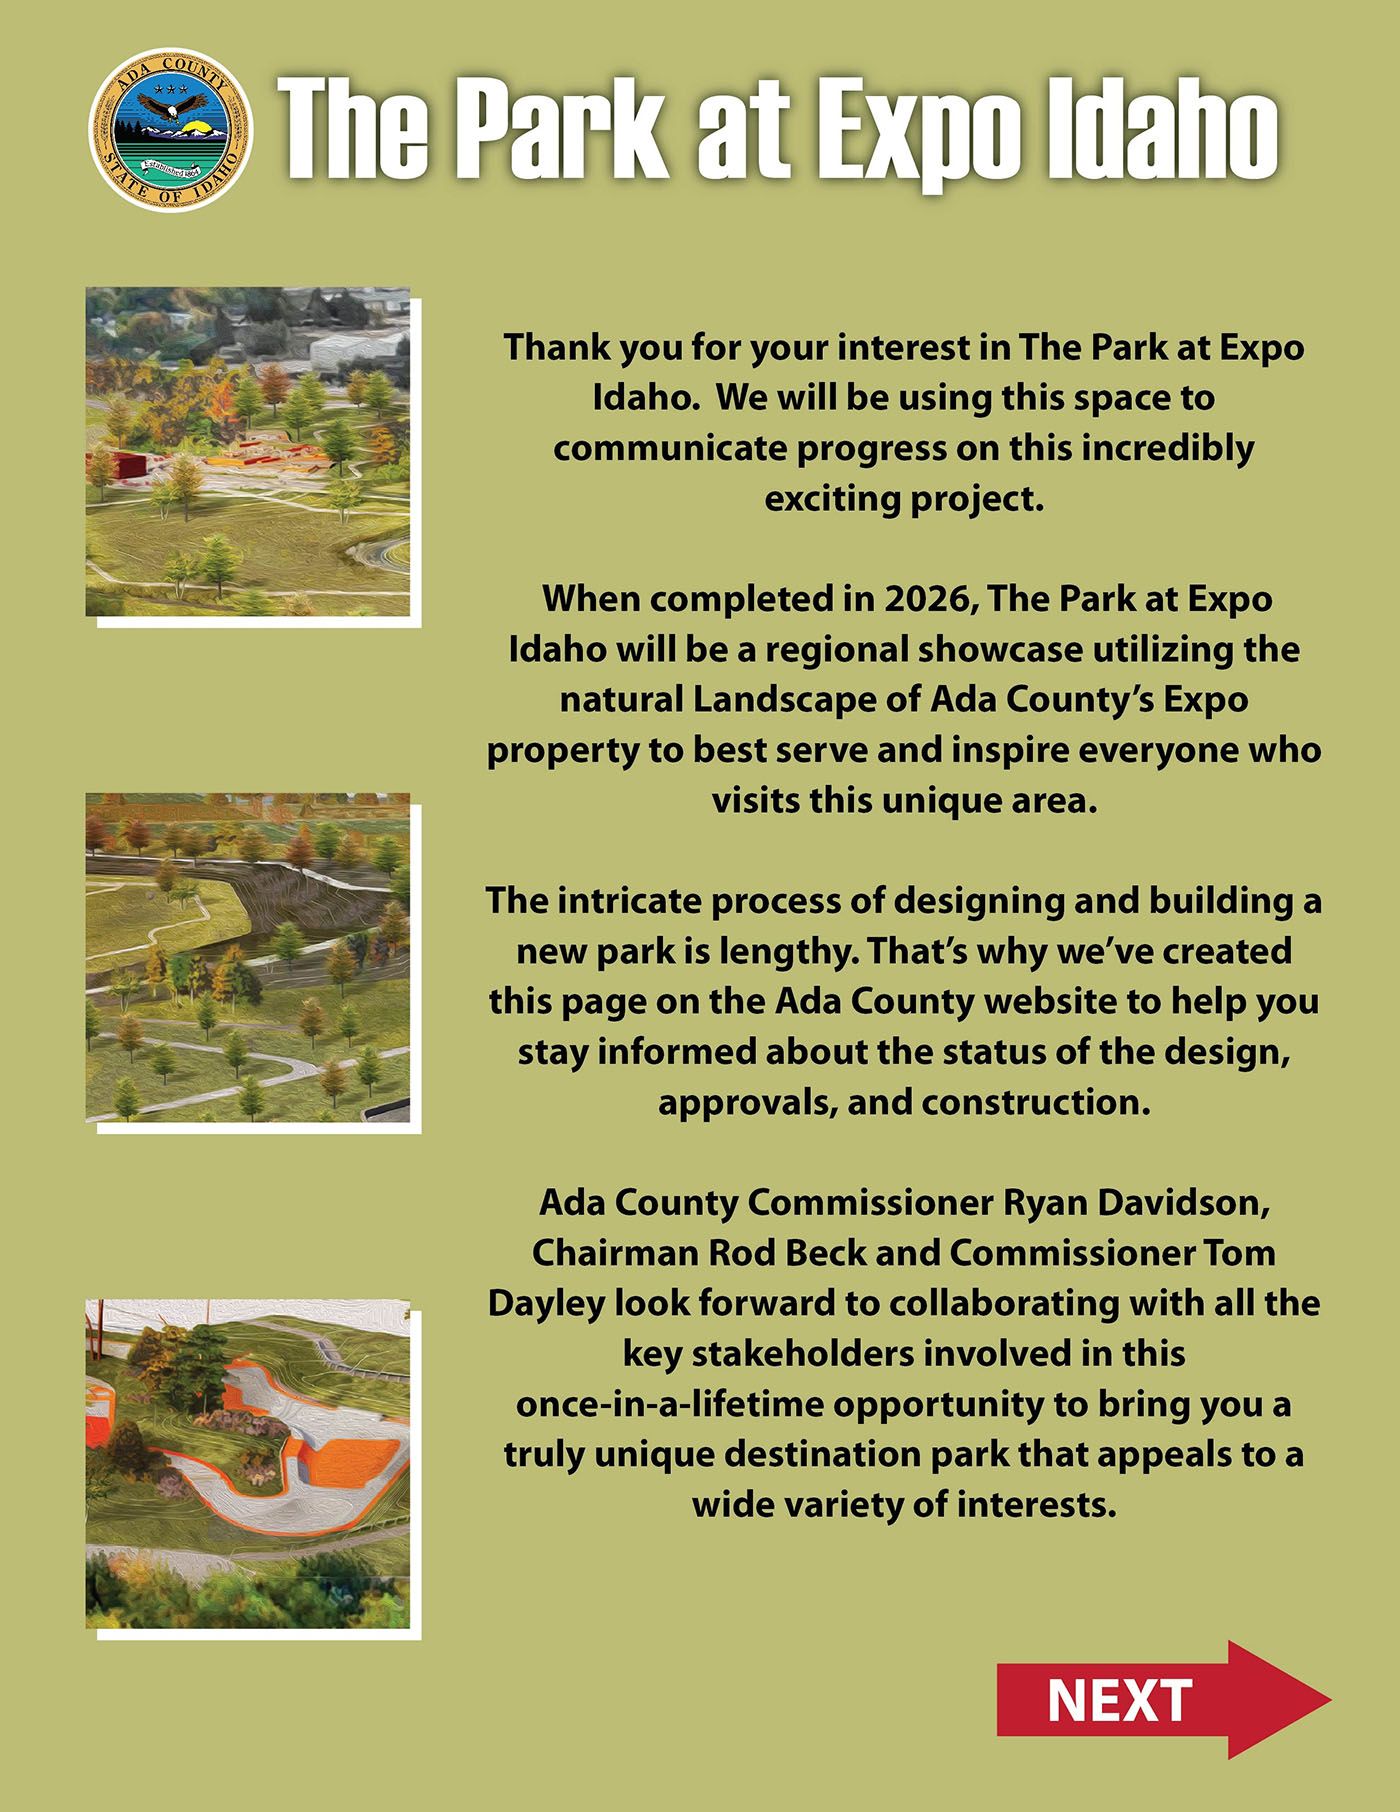 Thank you for your interest in The Park at Expo Idaho. We will be using this space to communicate progress on this incredibly exciting project.